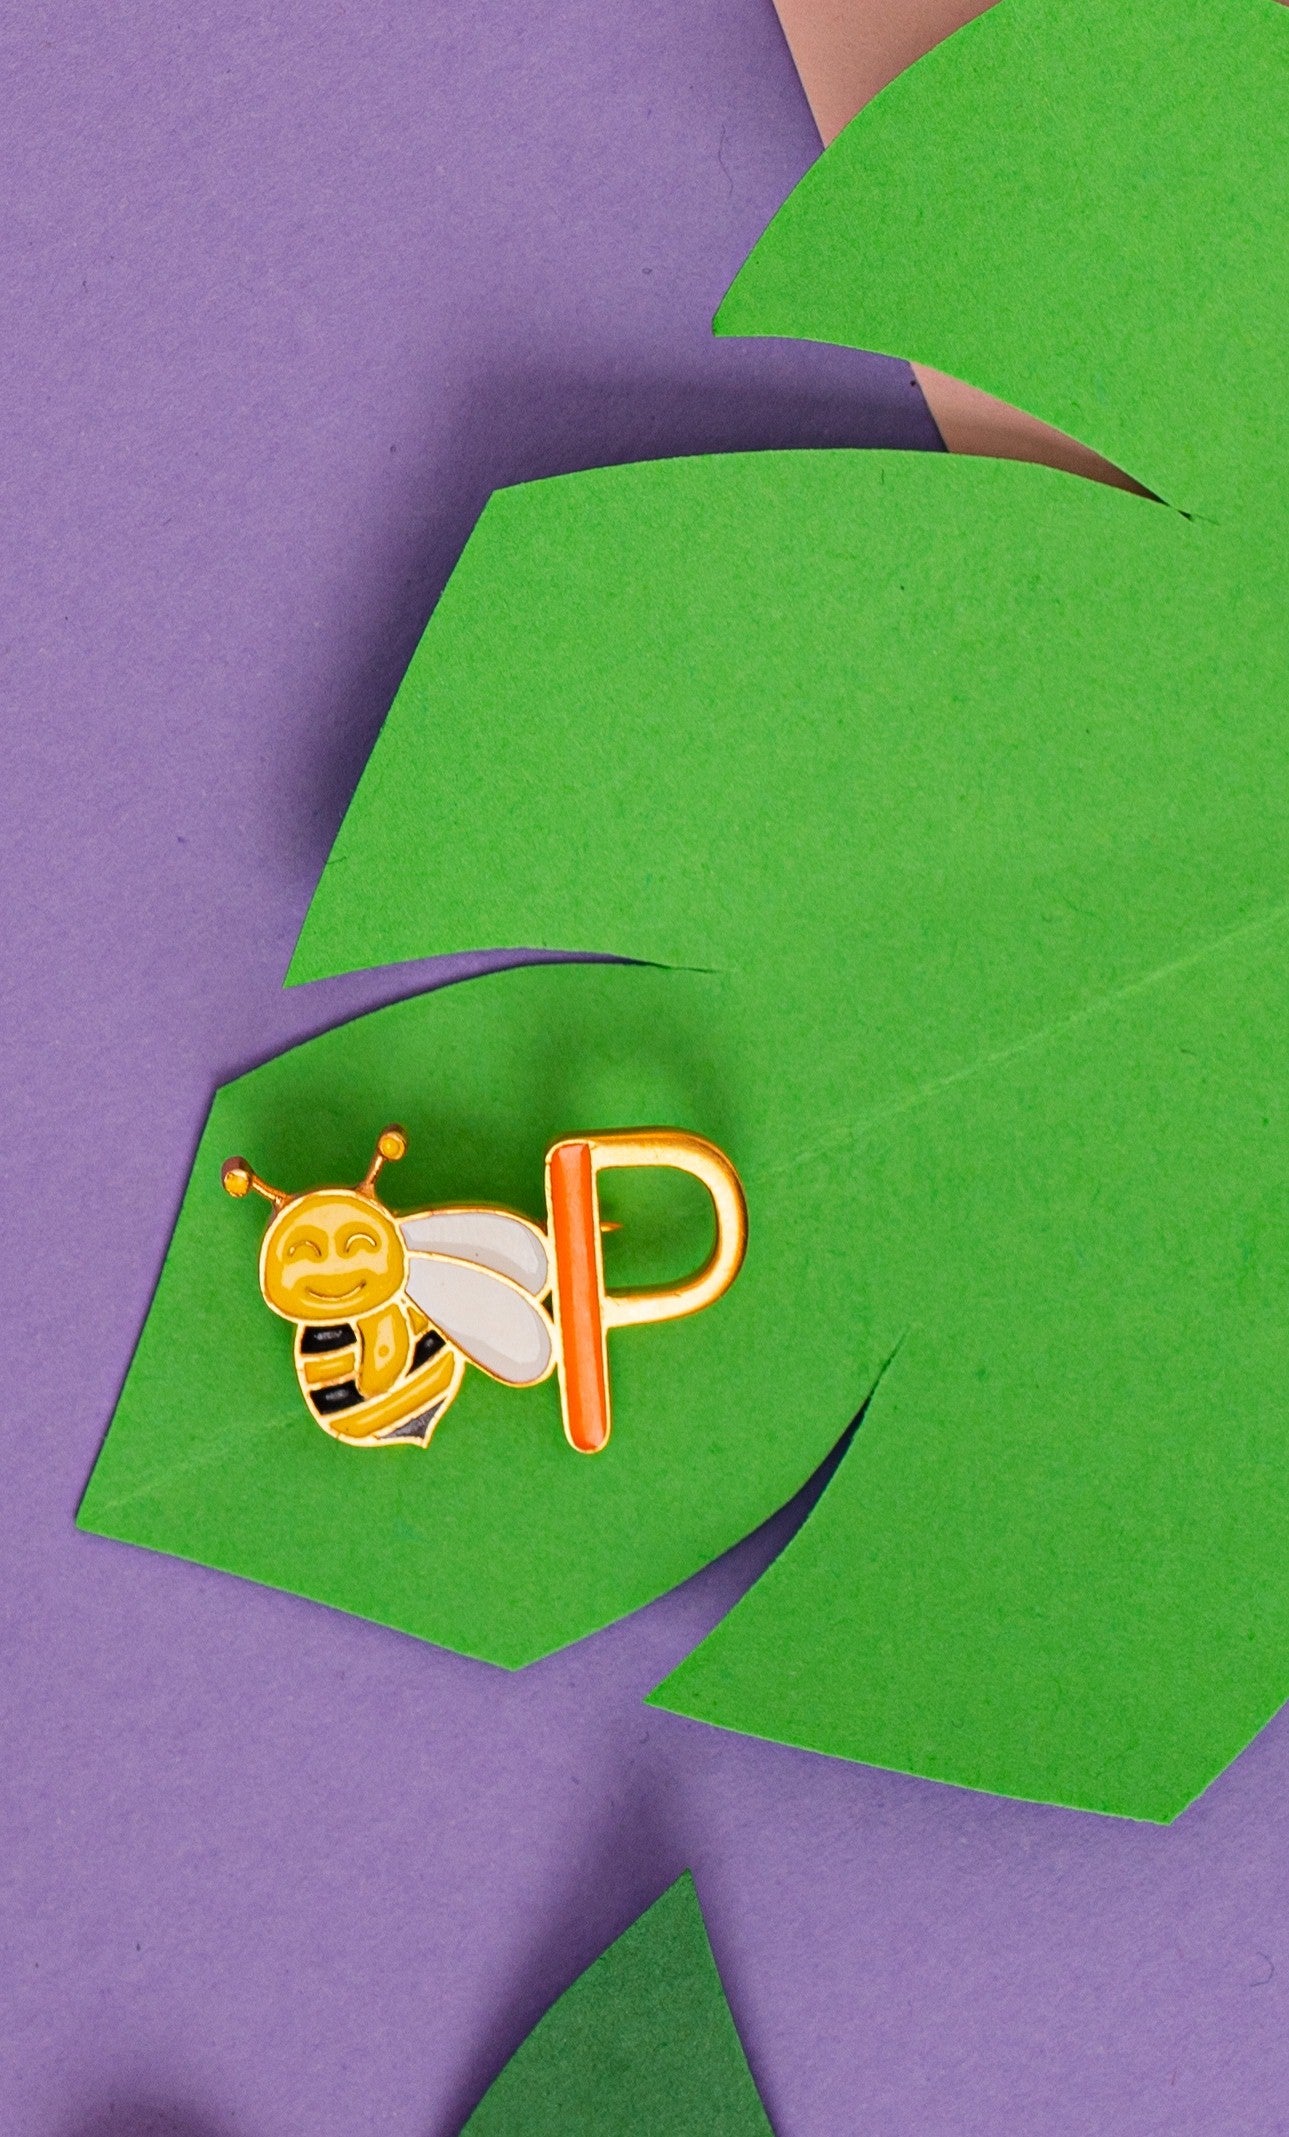 "P" WITH BEE NAME PIN